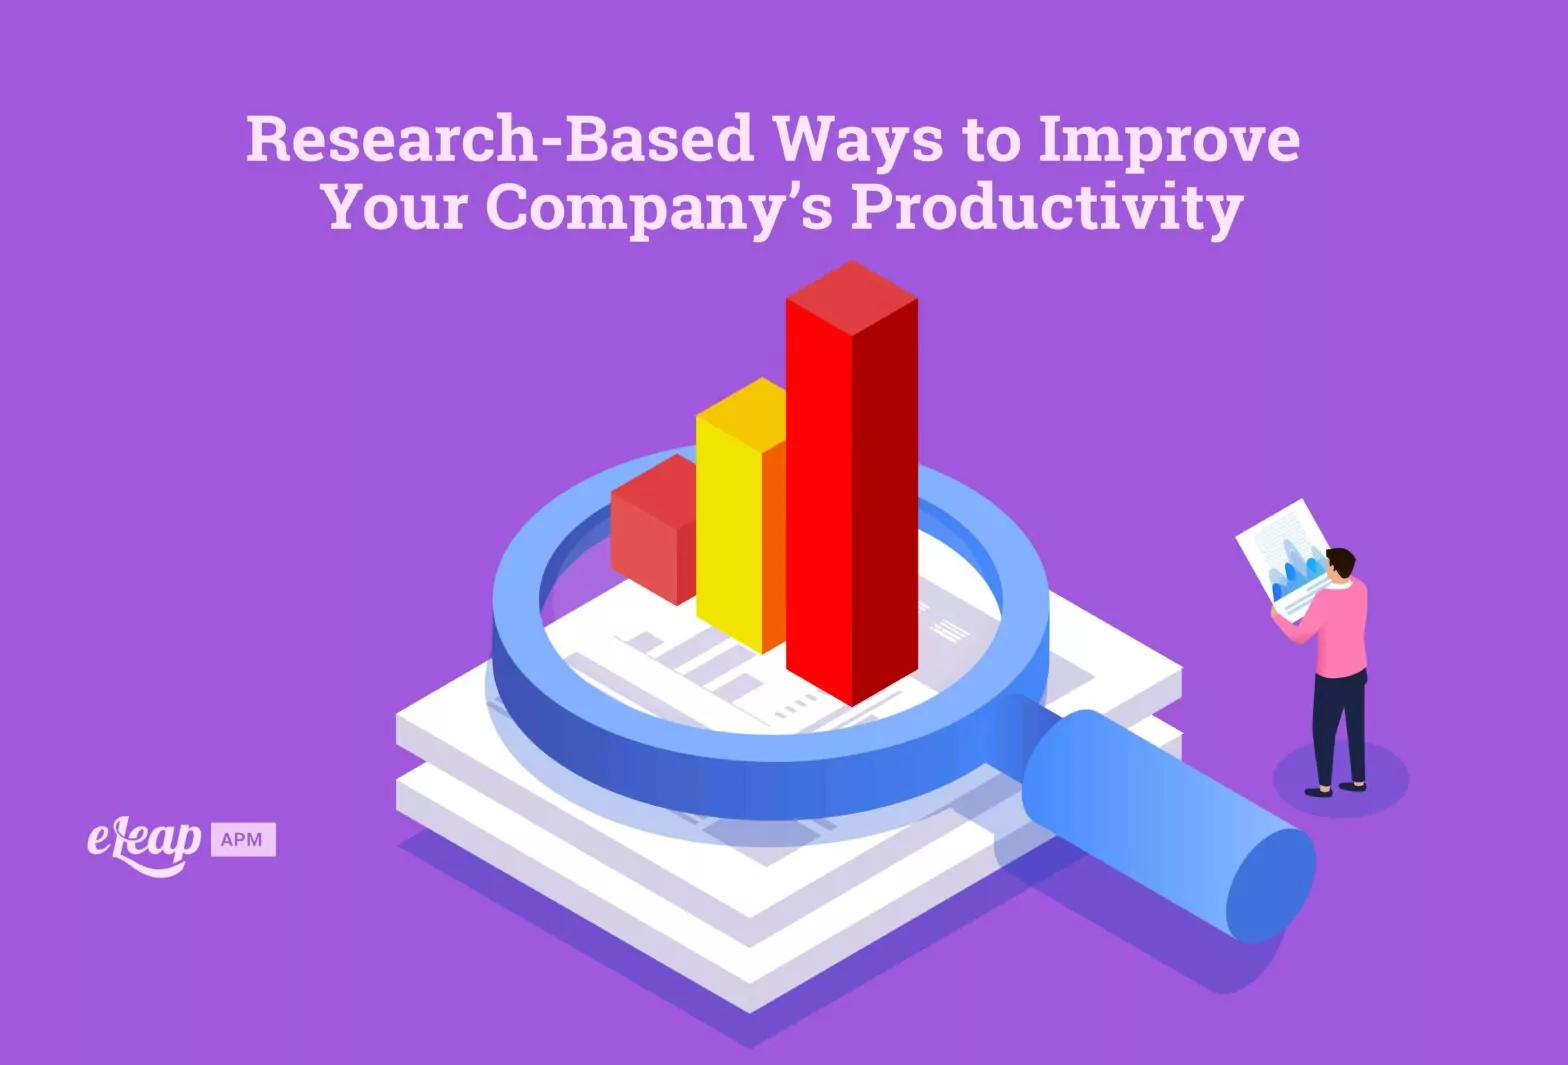 Research-Based Ways to Improve Your Company’s Productivity